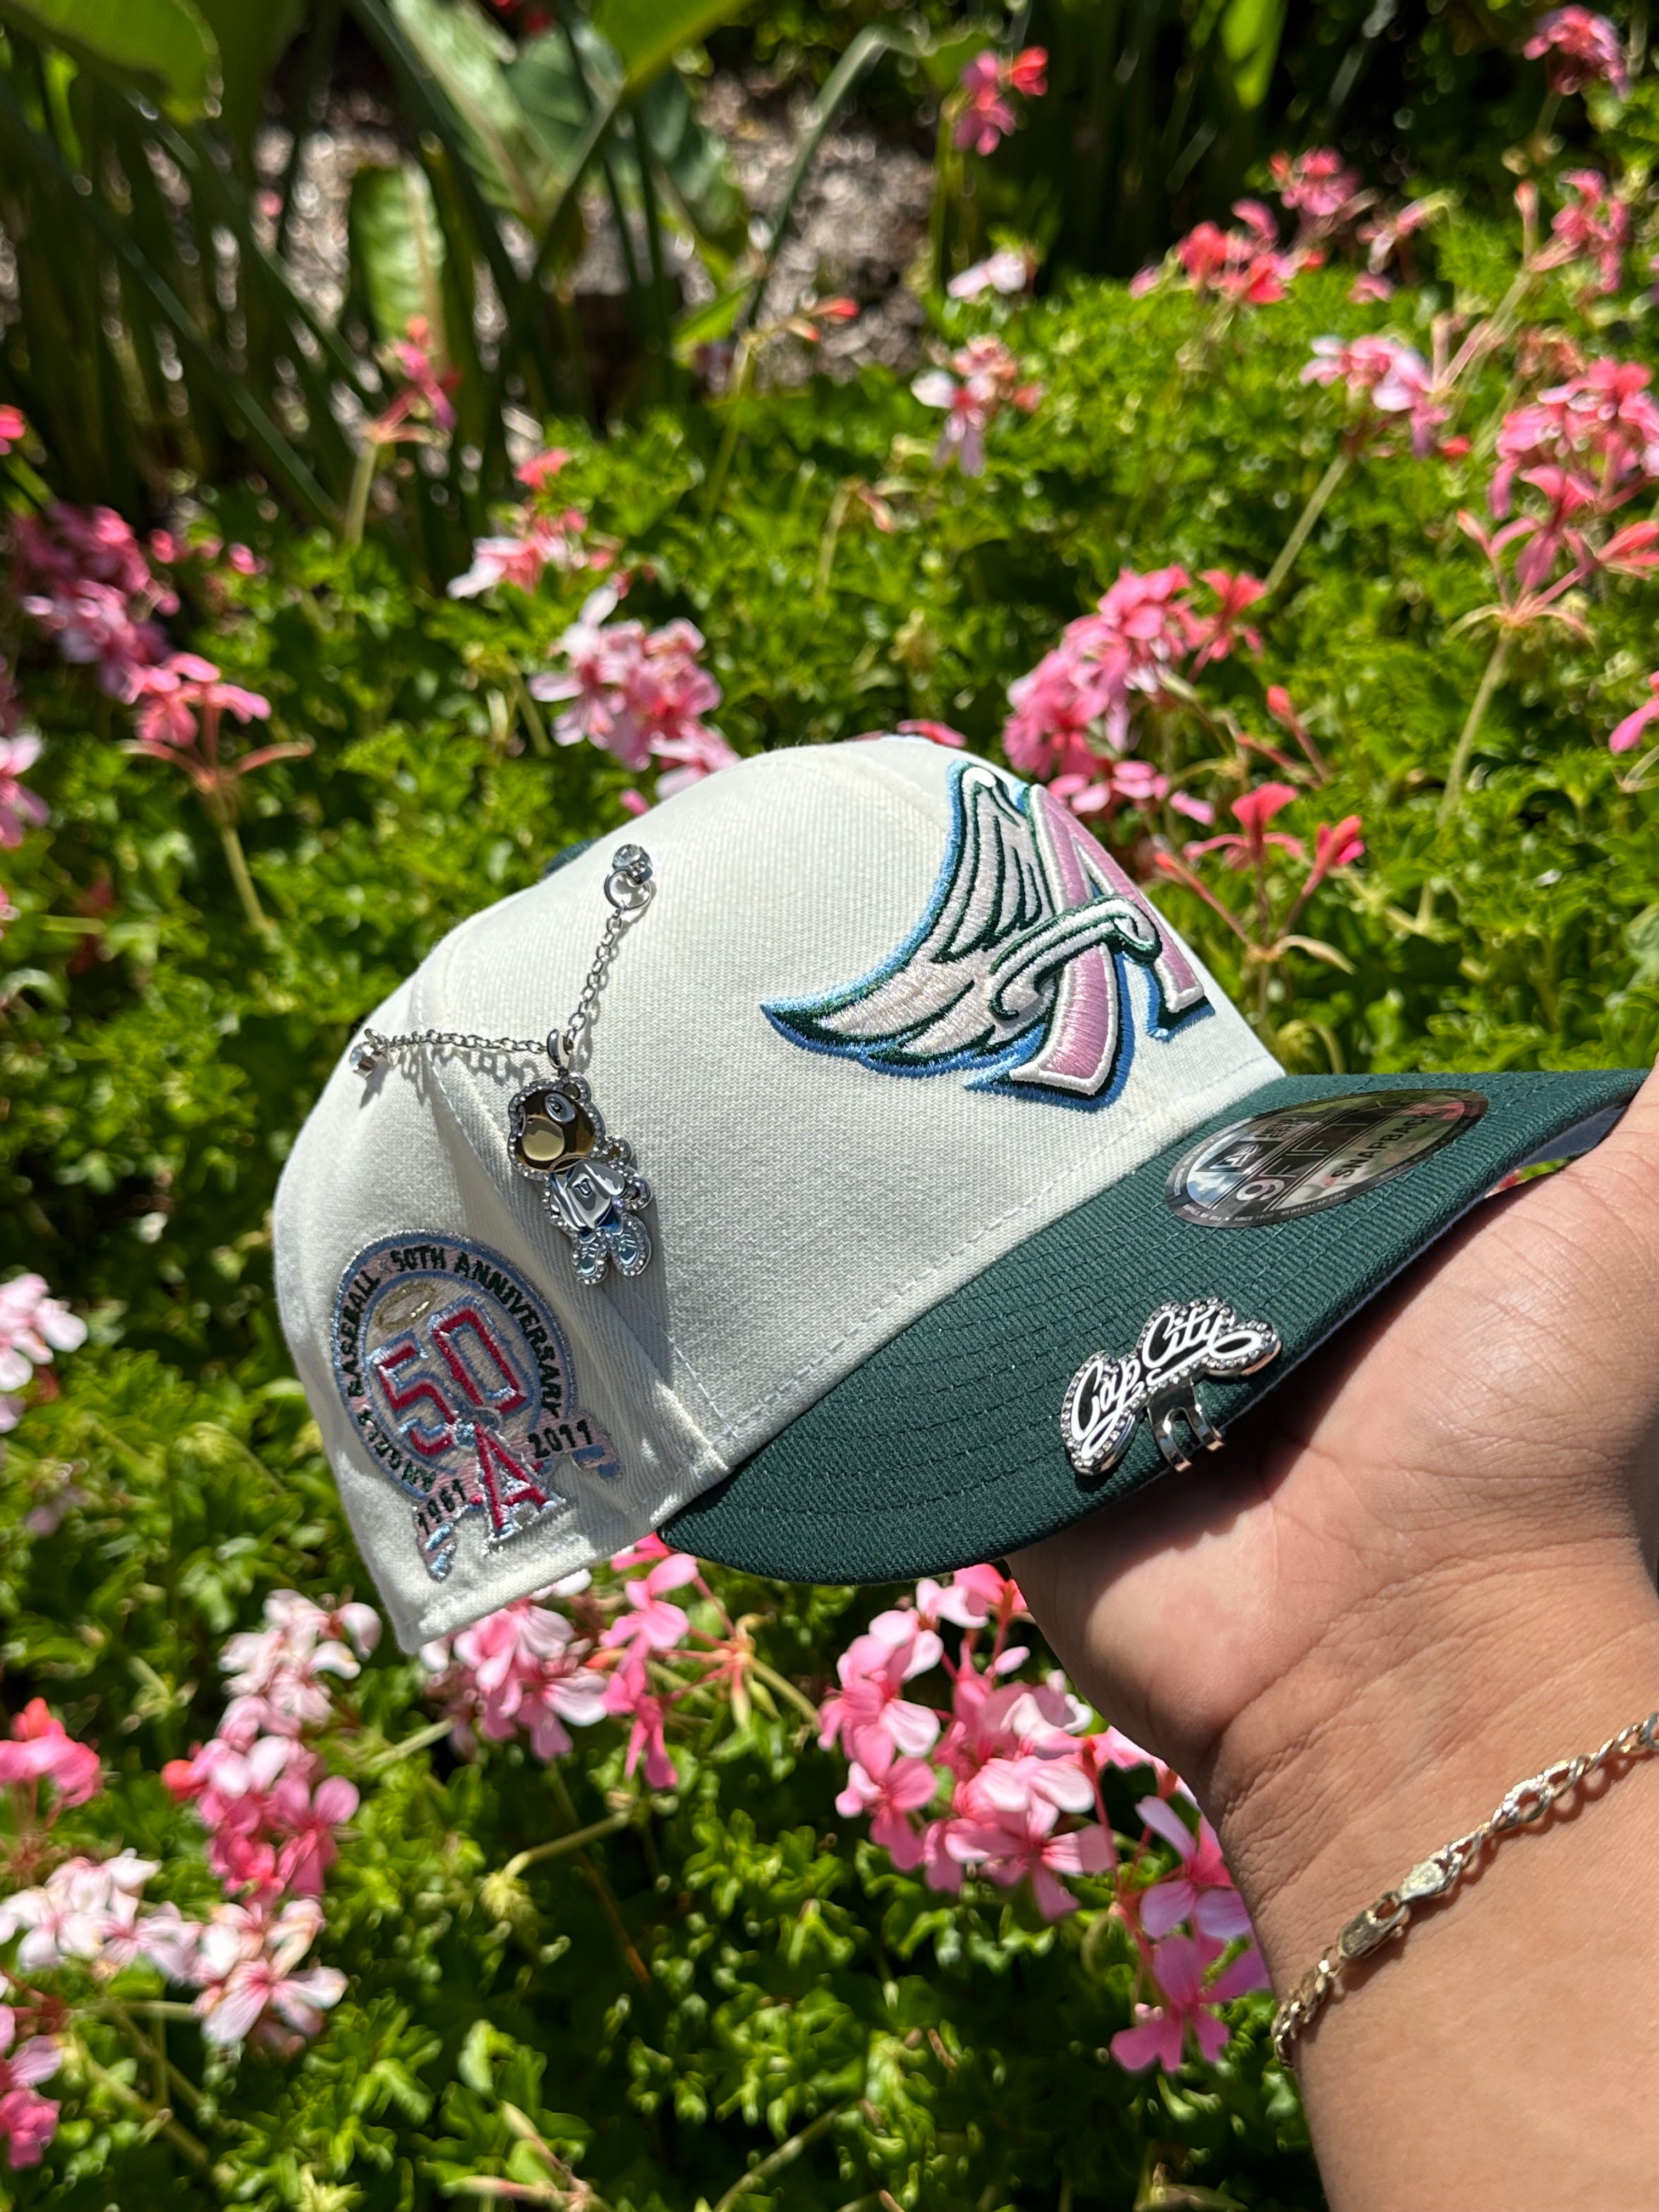 NEW ERA 9FIFTY CHROME WHITE/FOREST GREEN ANAHEIM ANGELS SNAPBACK W/ 50TH ANNIVERSARY SIDE PATCH